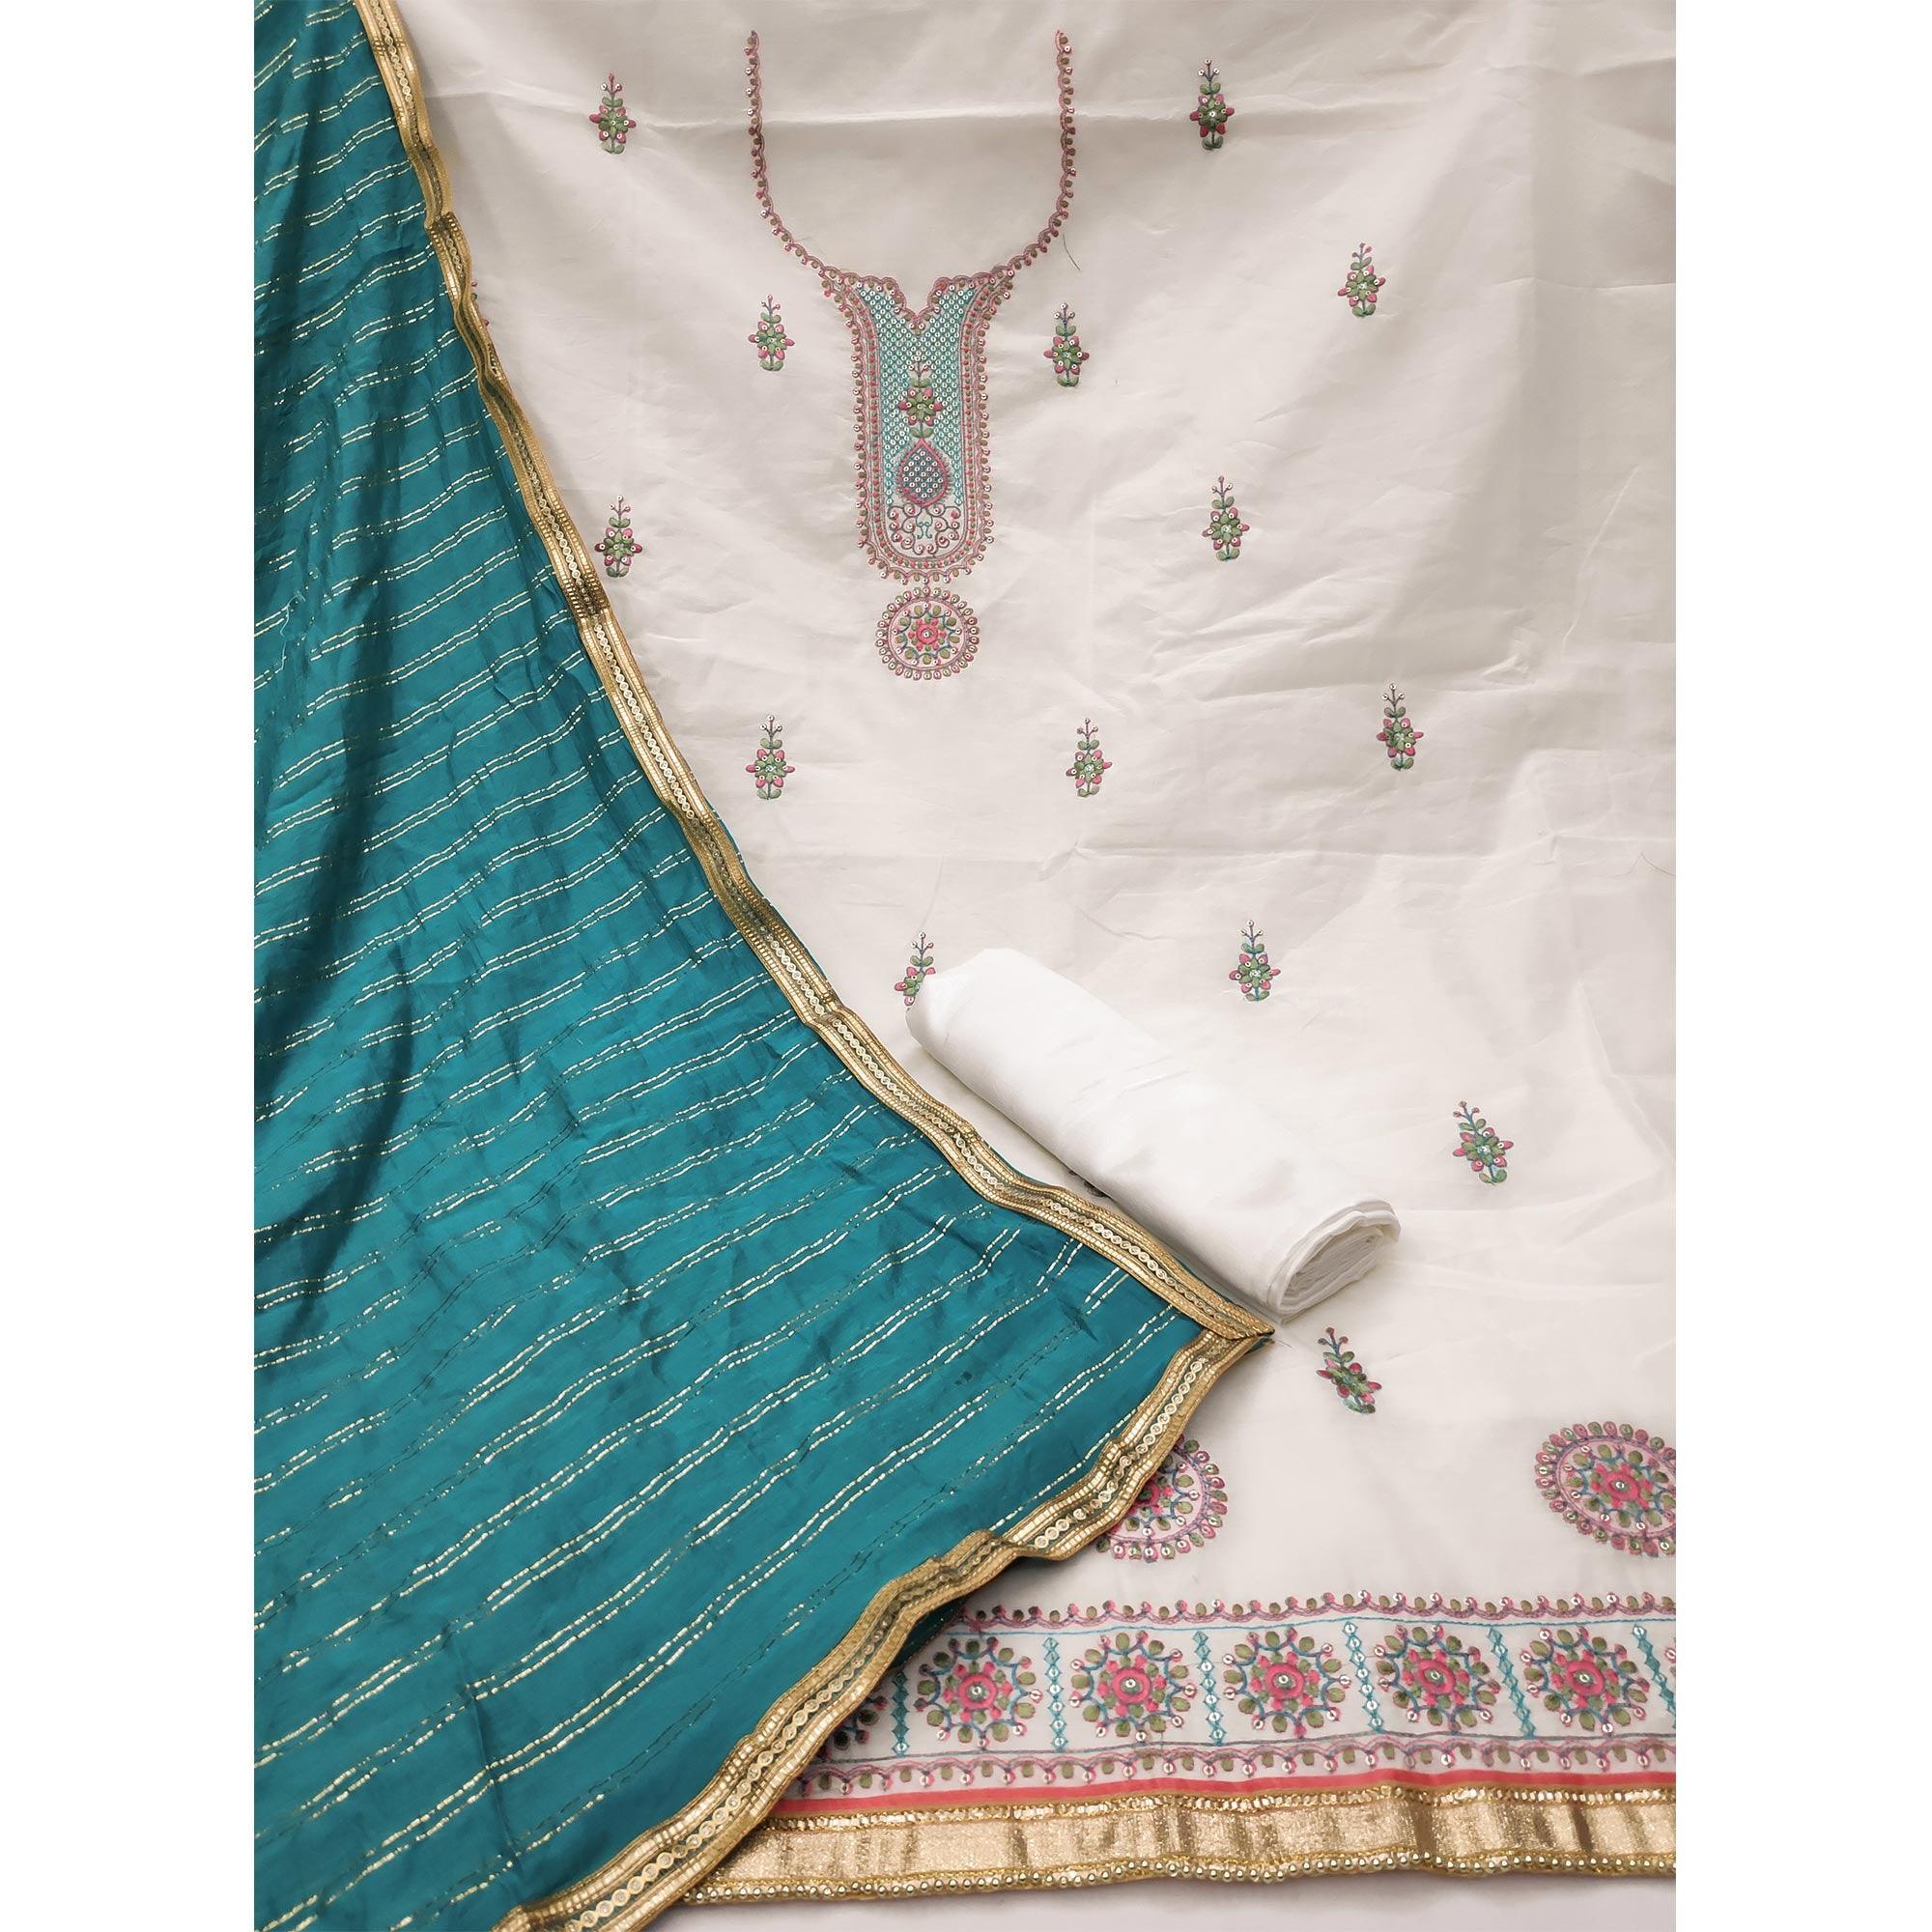 Off-White Festive Wear Sequence Embroidery With Handwork Modal Chanderi Dress Material - Peachmode